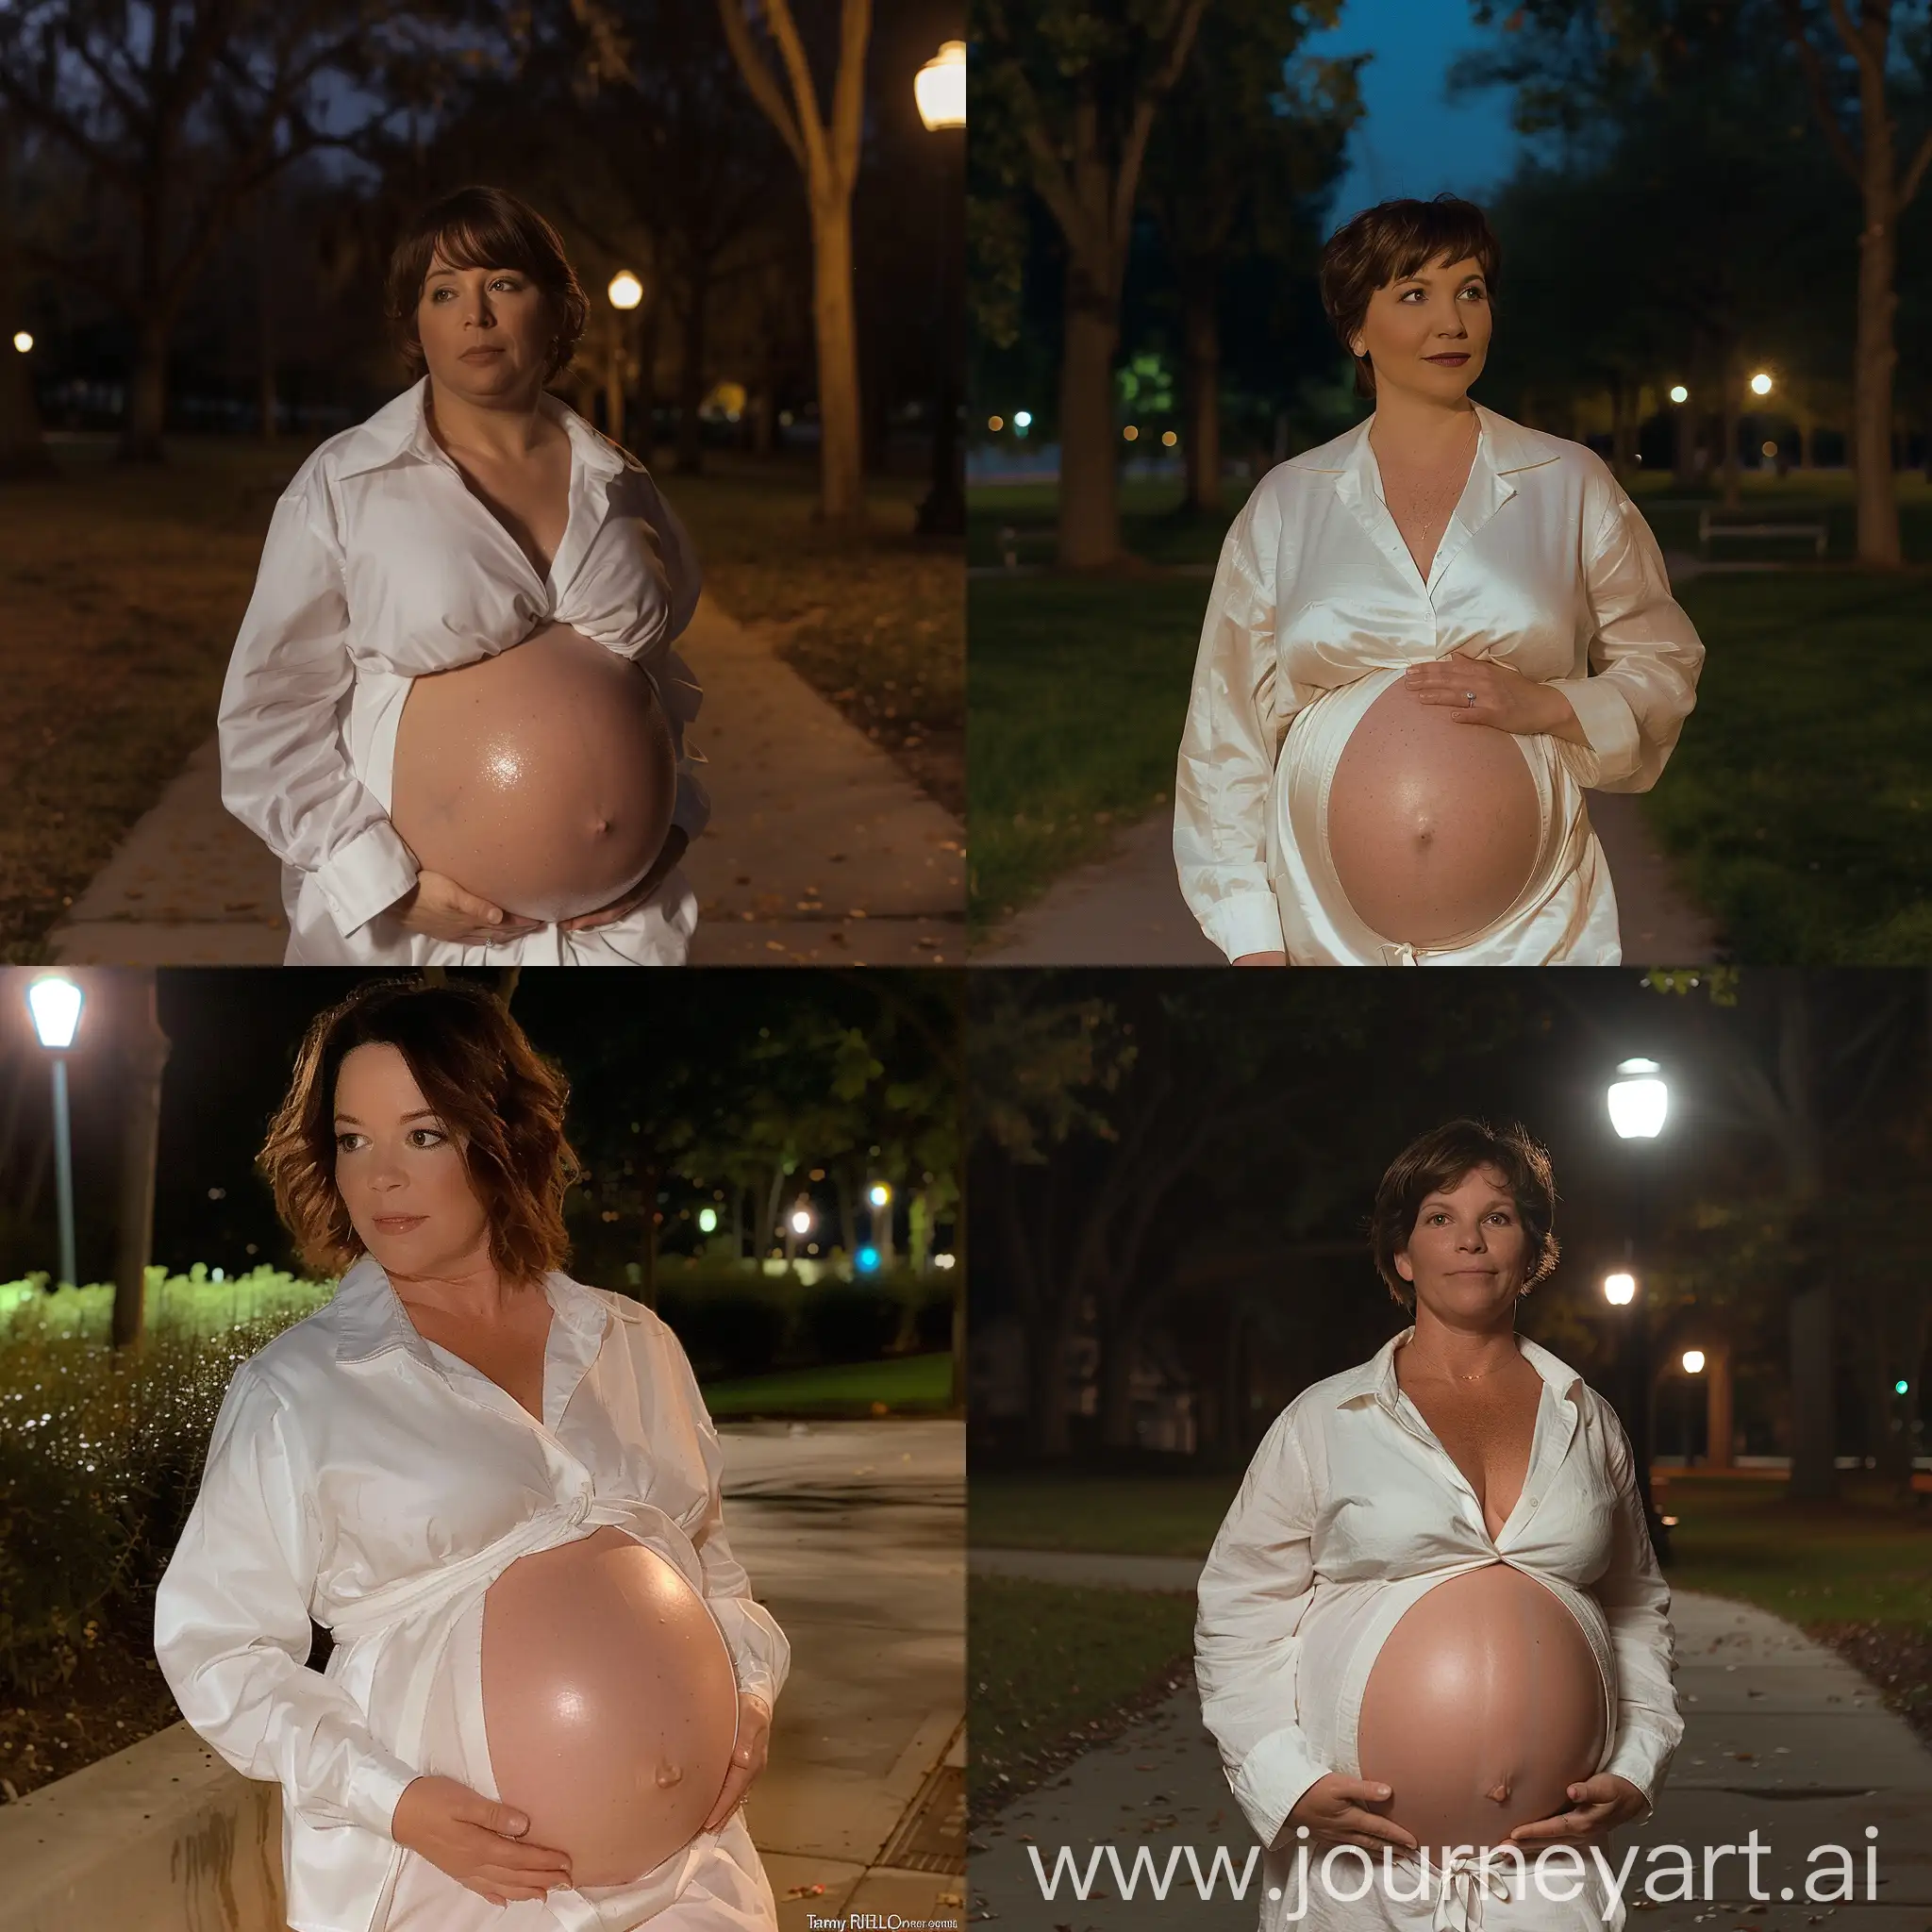 Pregnant-Woman-Walking-in-Park-at-Night-with-Twins